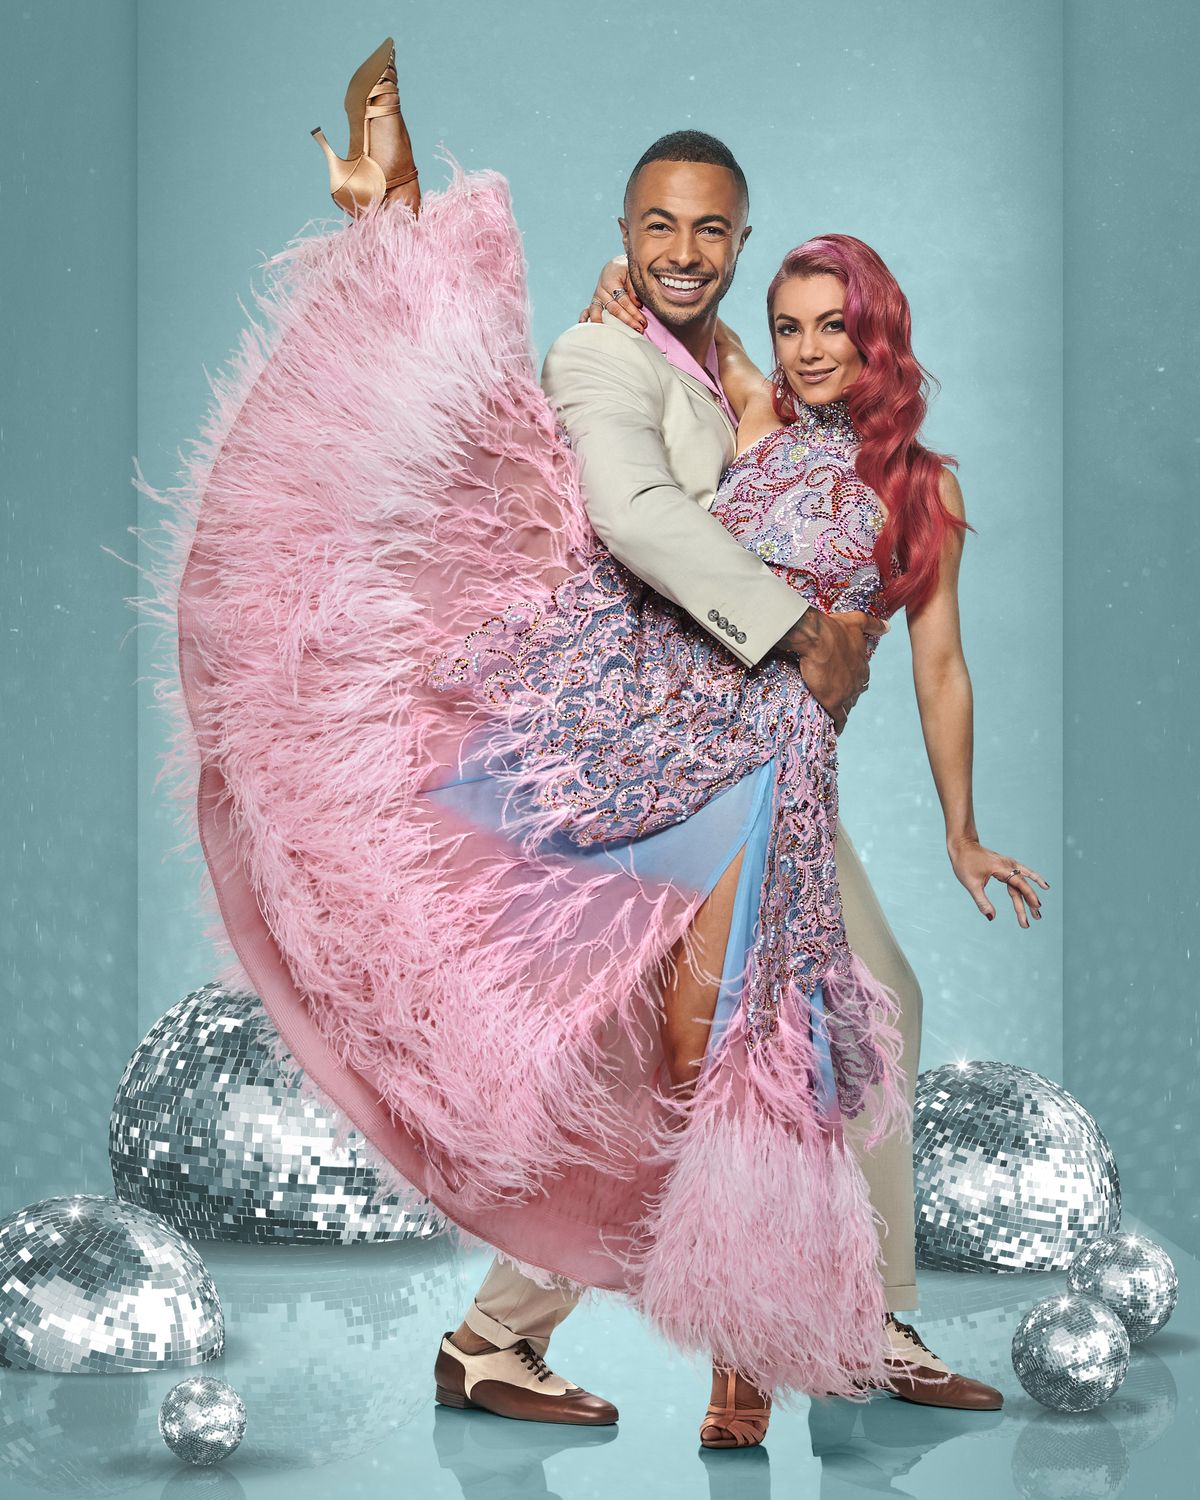 strictly dancing tour dates